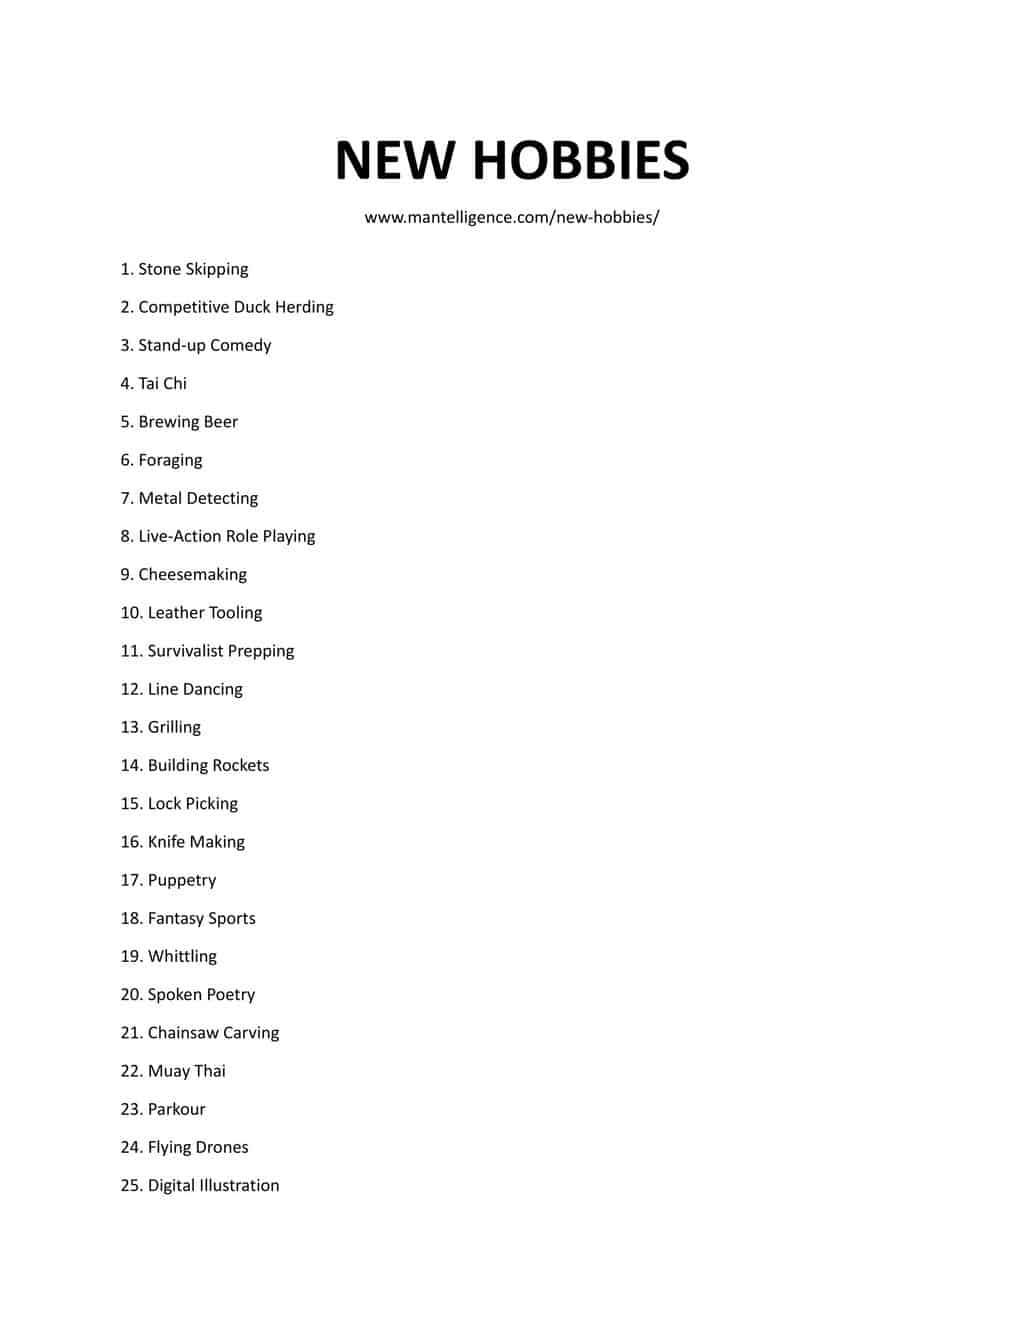 Downloadable and Printable List of Unique Hobbies